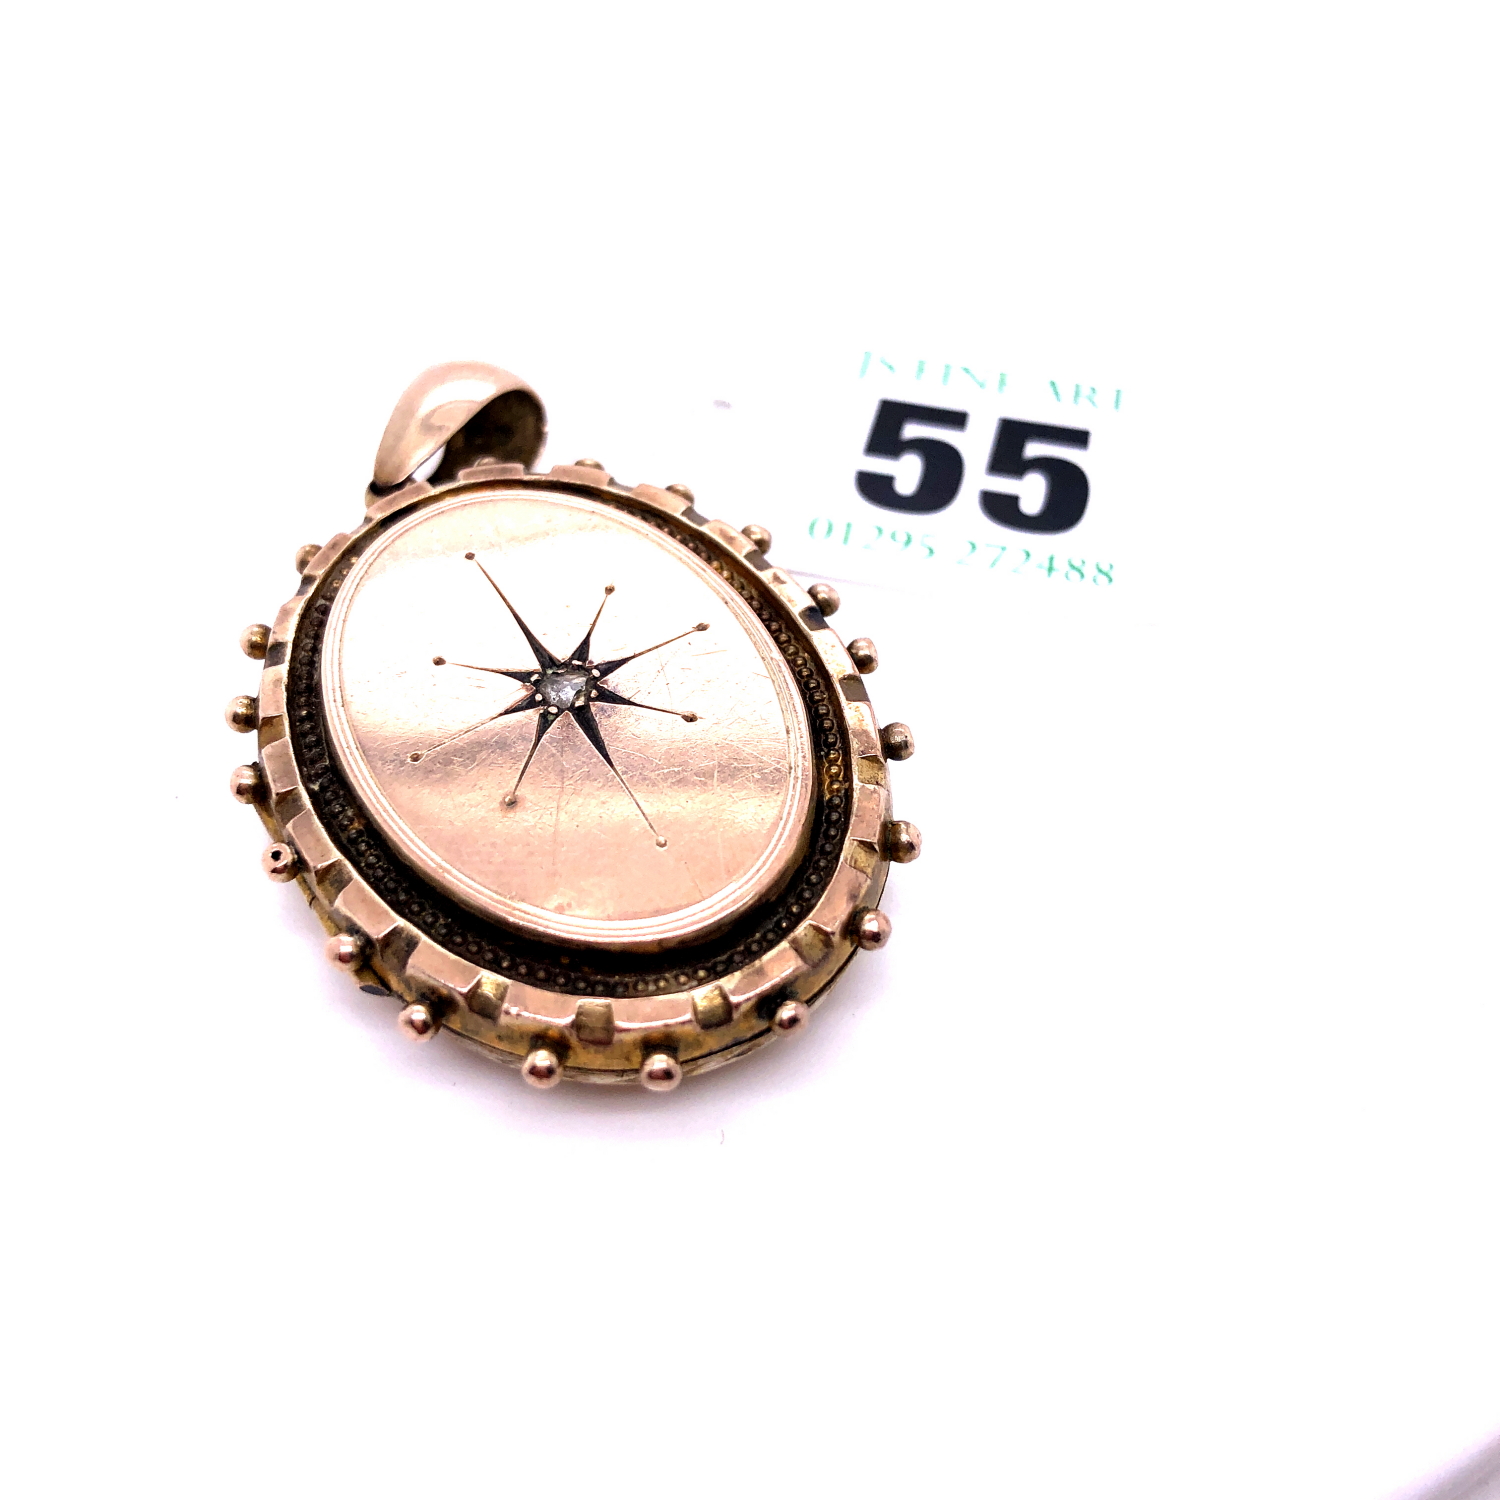 AN ANTIQUE VICTORIAN OVAL GOLD LOCKET WITH AN OLD CUT DIAMOND IN A STARBURST SETTING AND AN ORNATE - Image 9 of 9